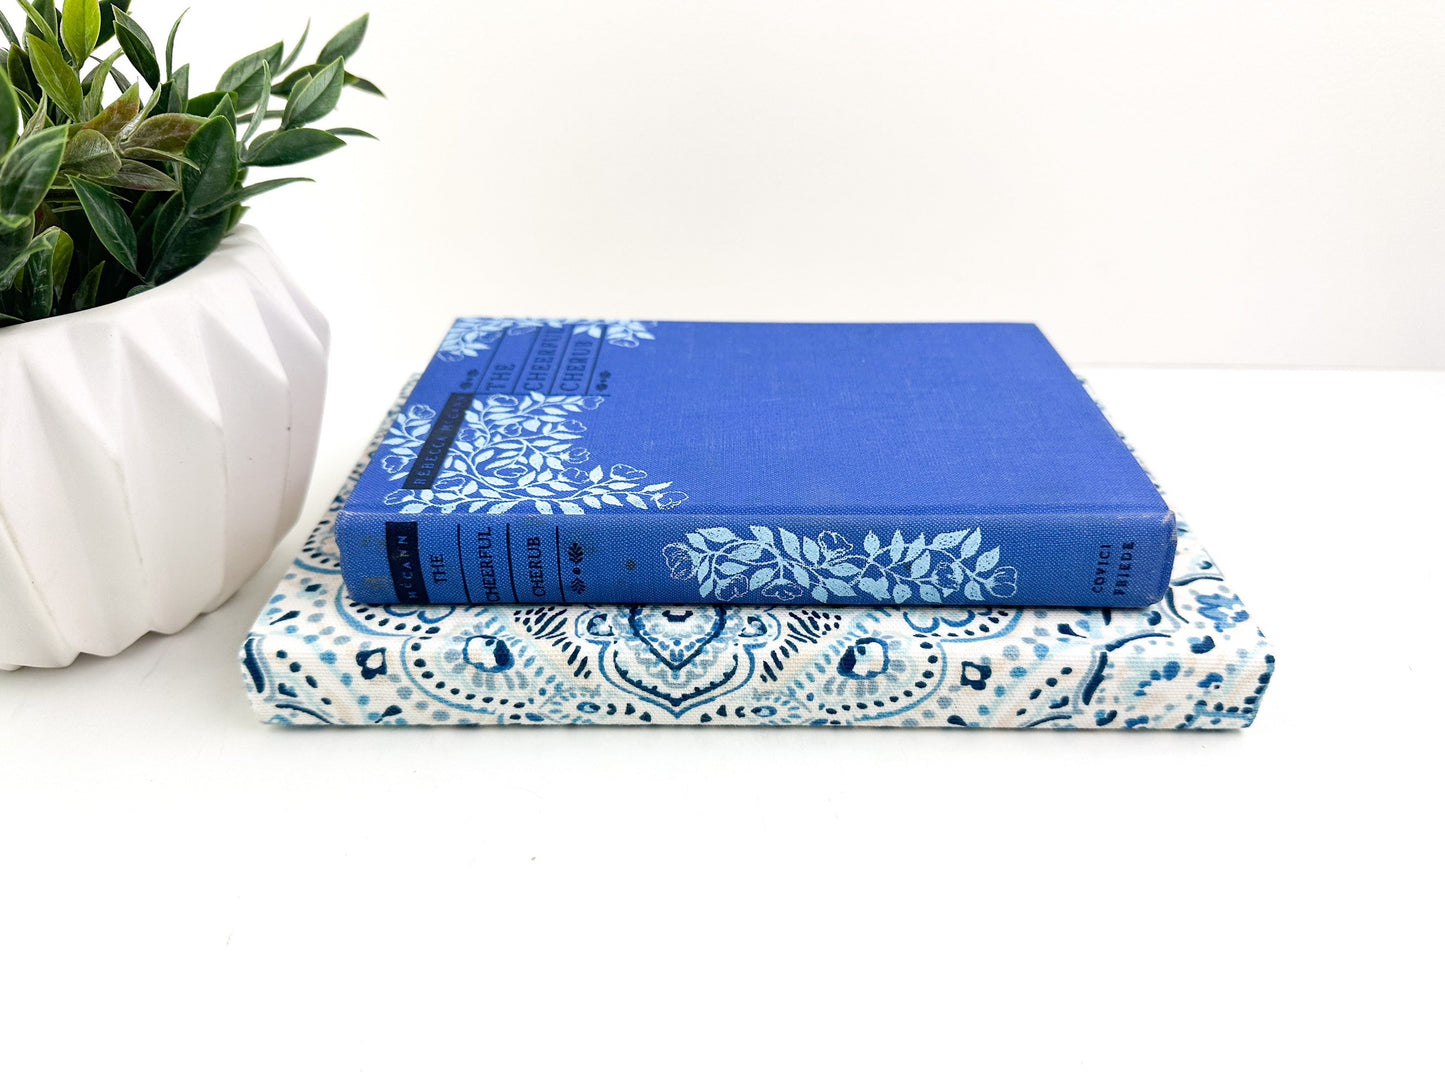 Book Set, Decorative Books for Home Decor, Books by Color, Books by the Foot, Shelf Decor